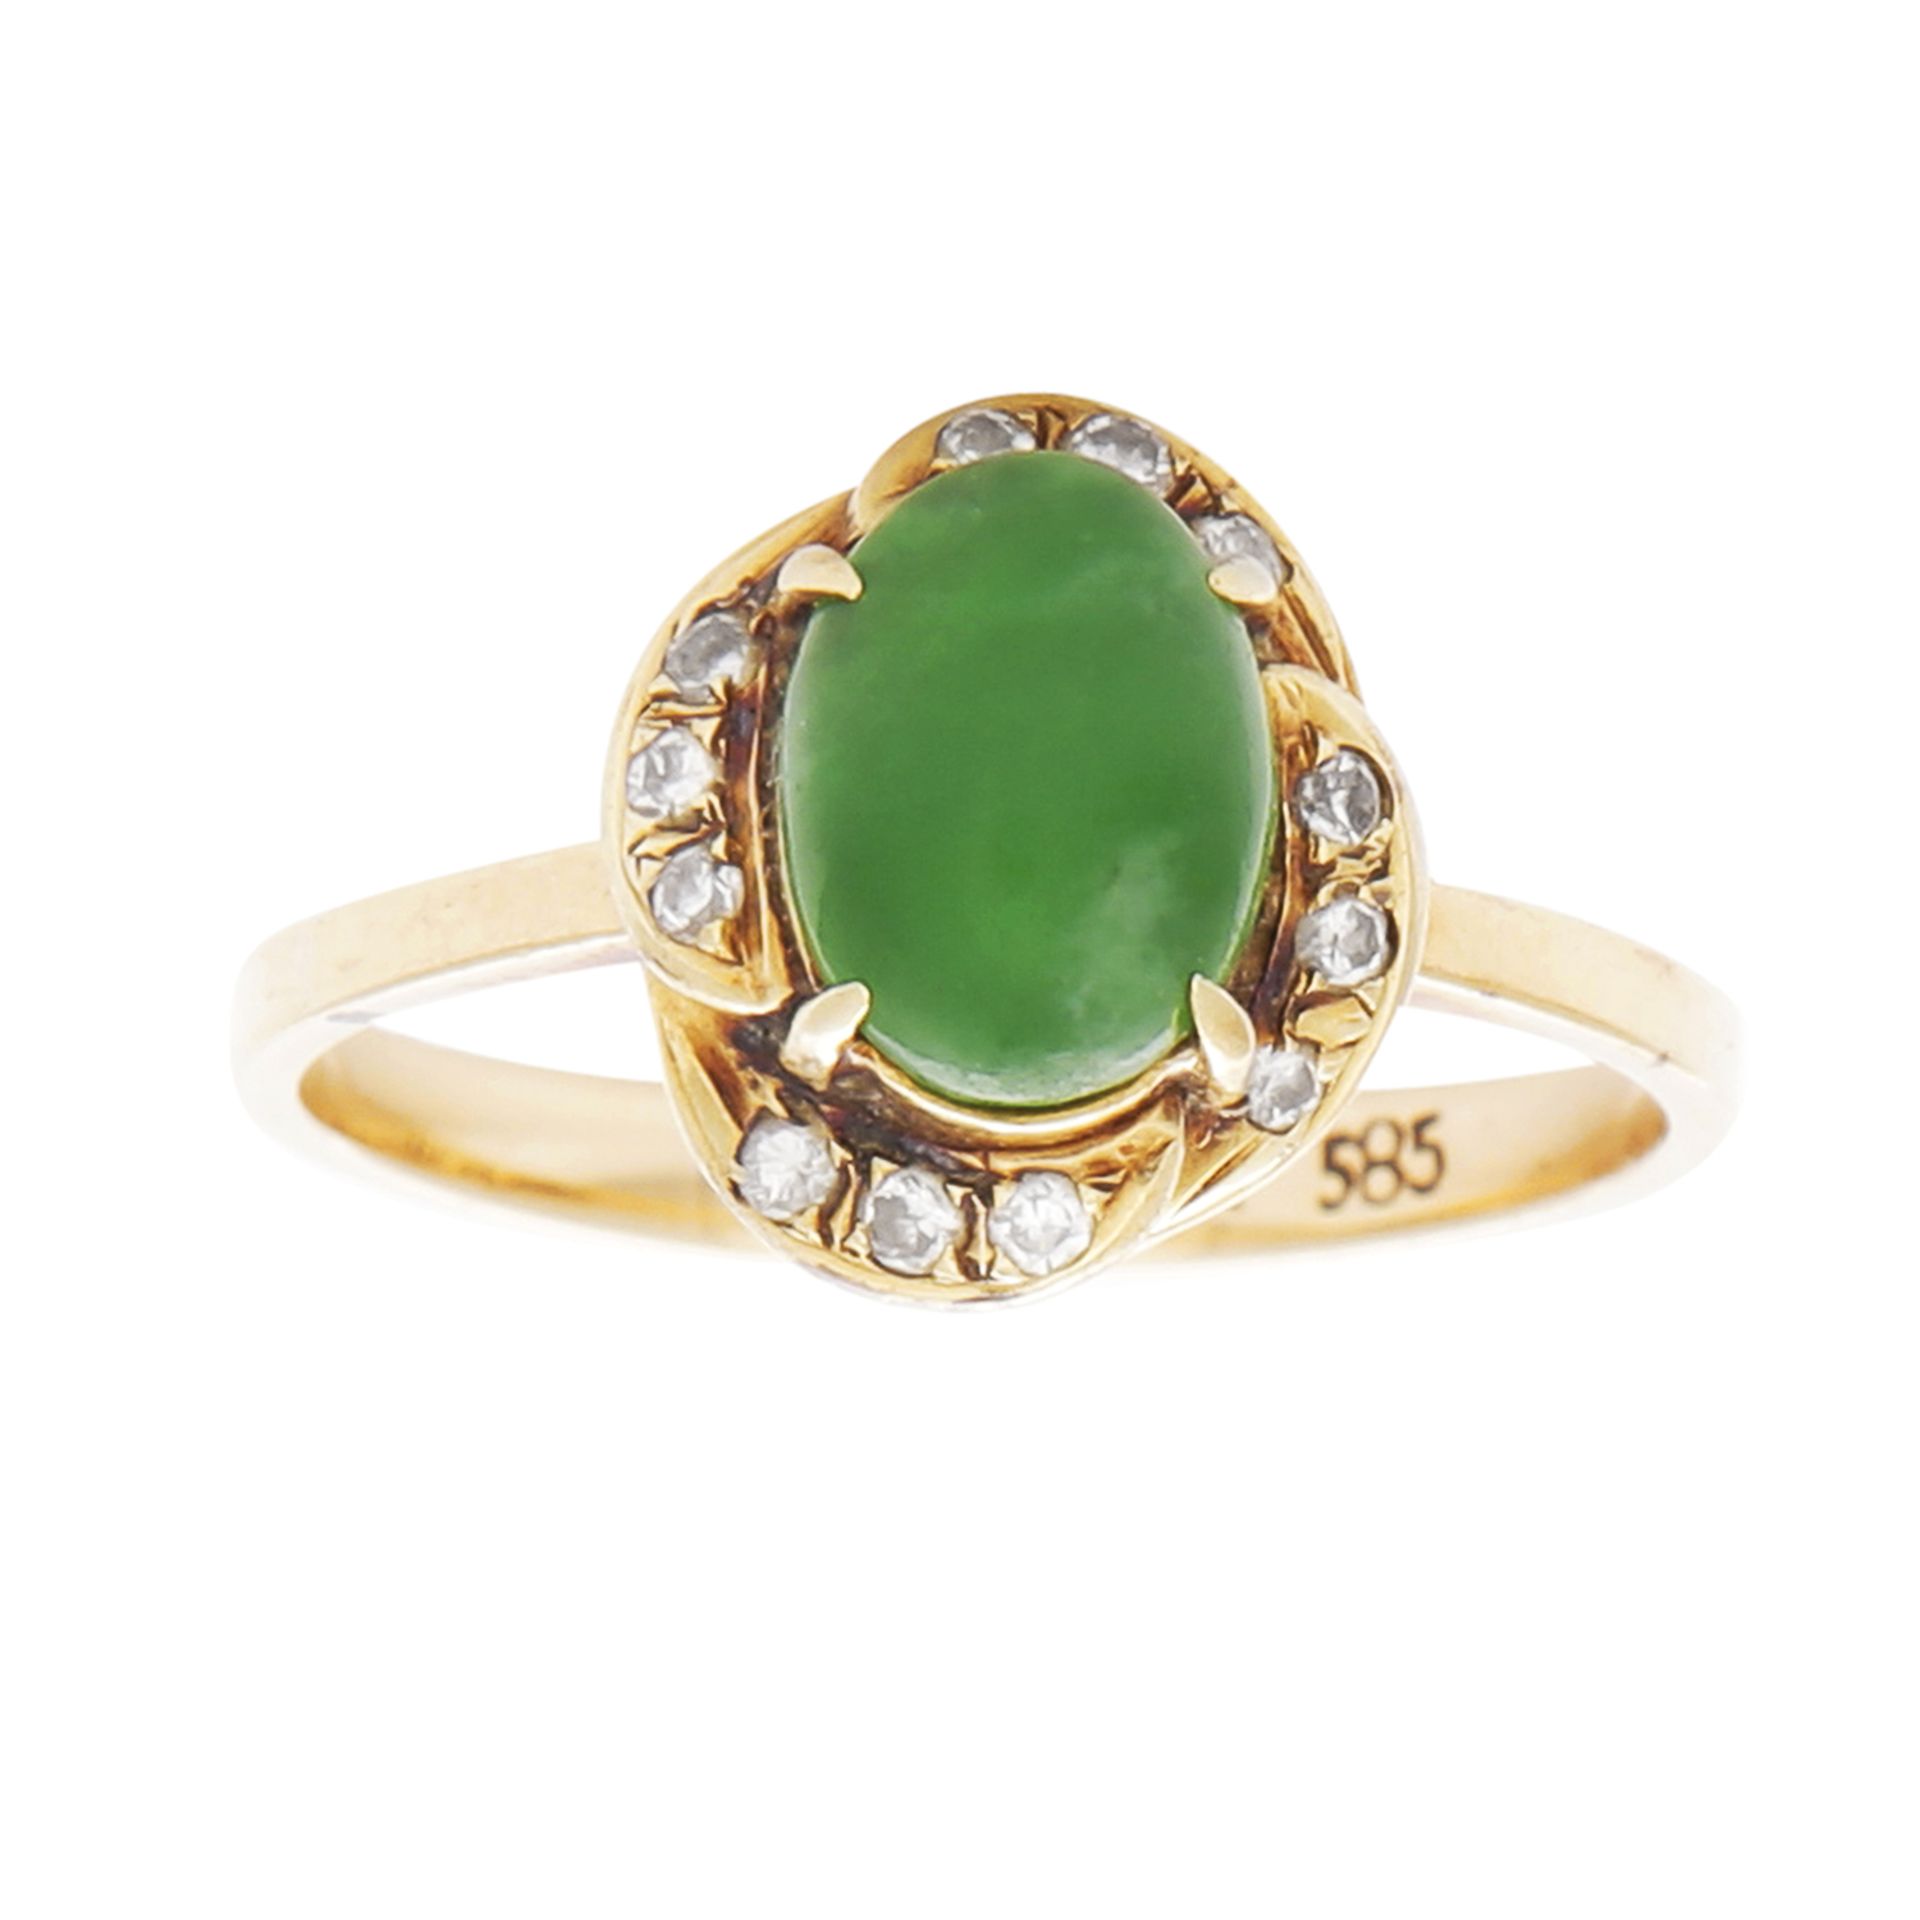 JADEITE JADE AND DIAMOND RING the oval jade cabochon within a stylised diamond border, size L / 5.